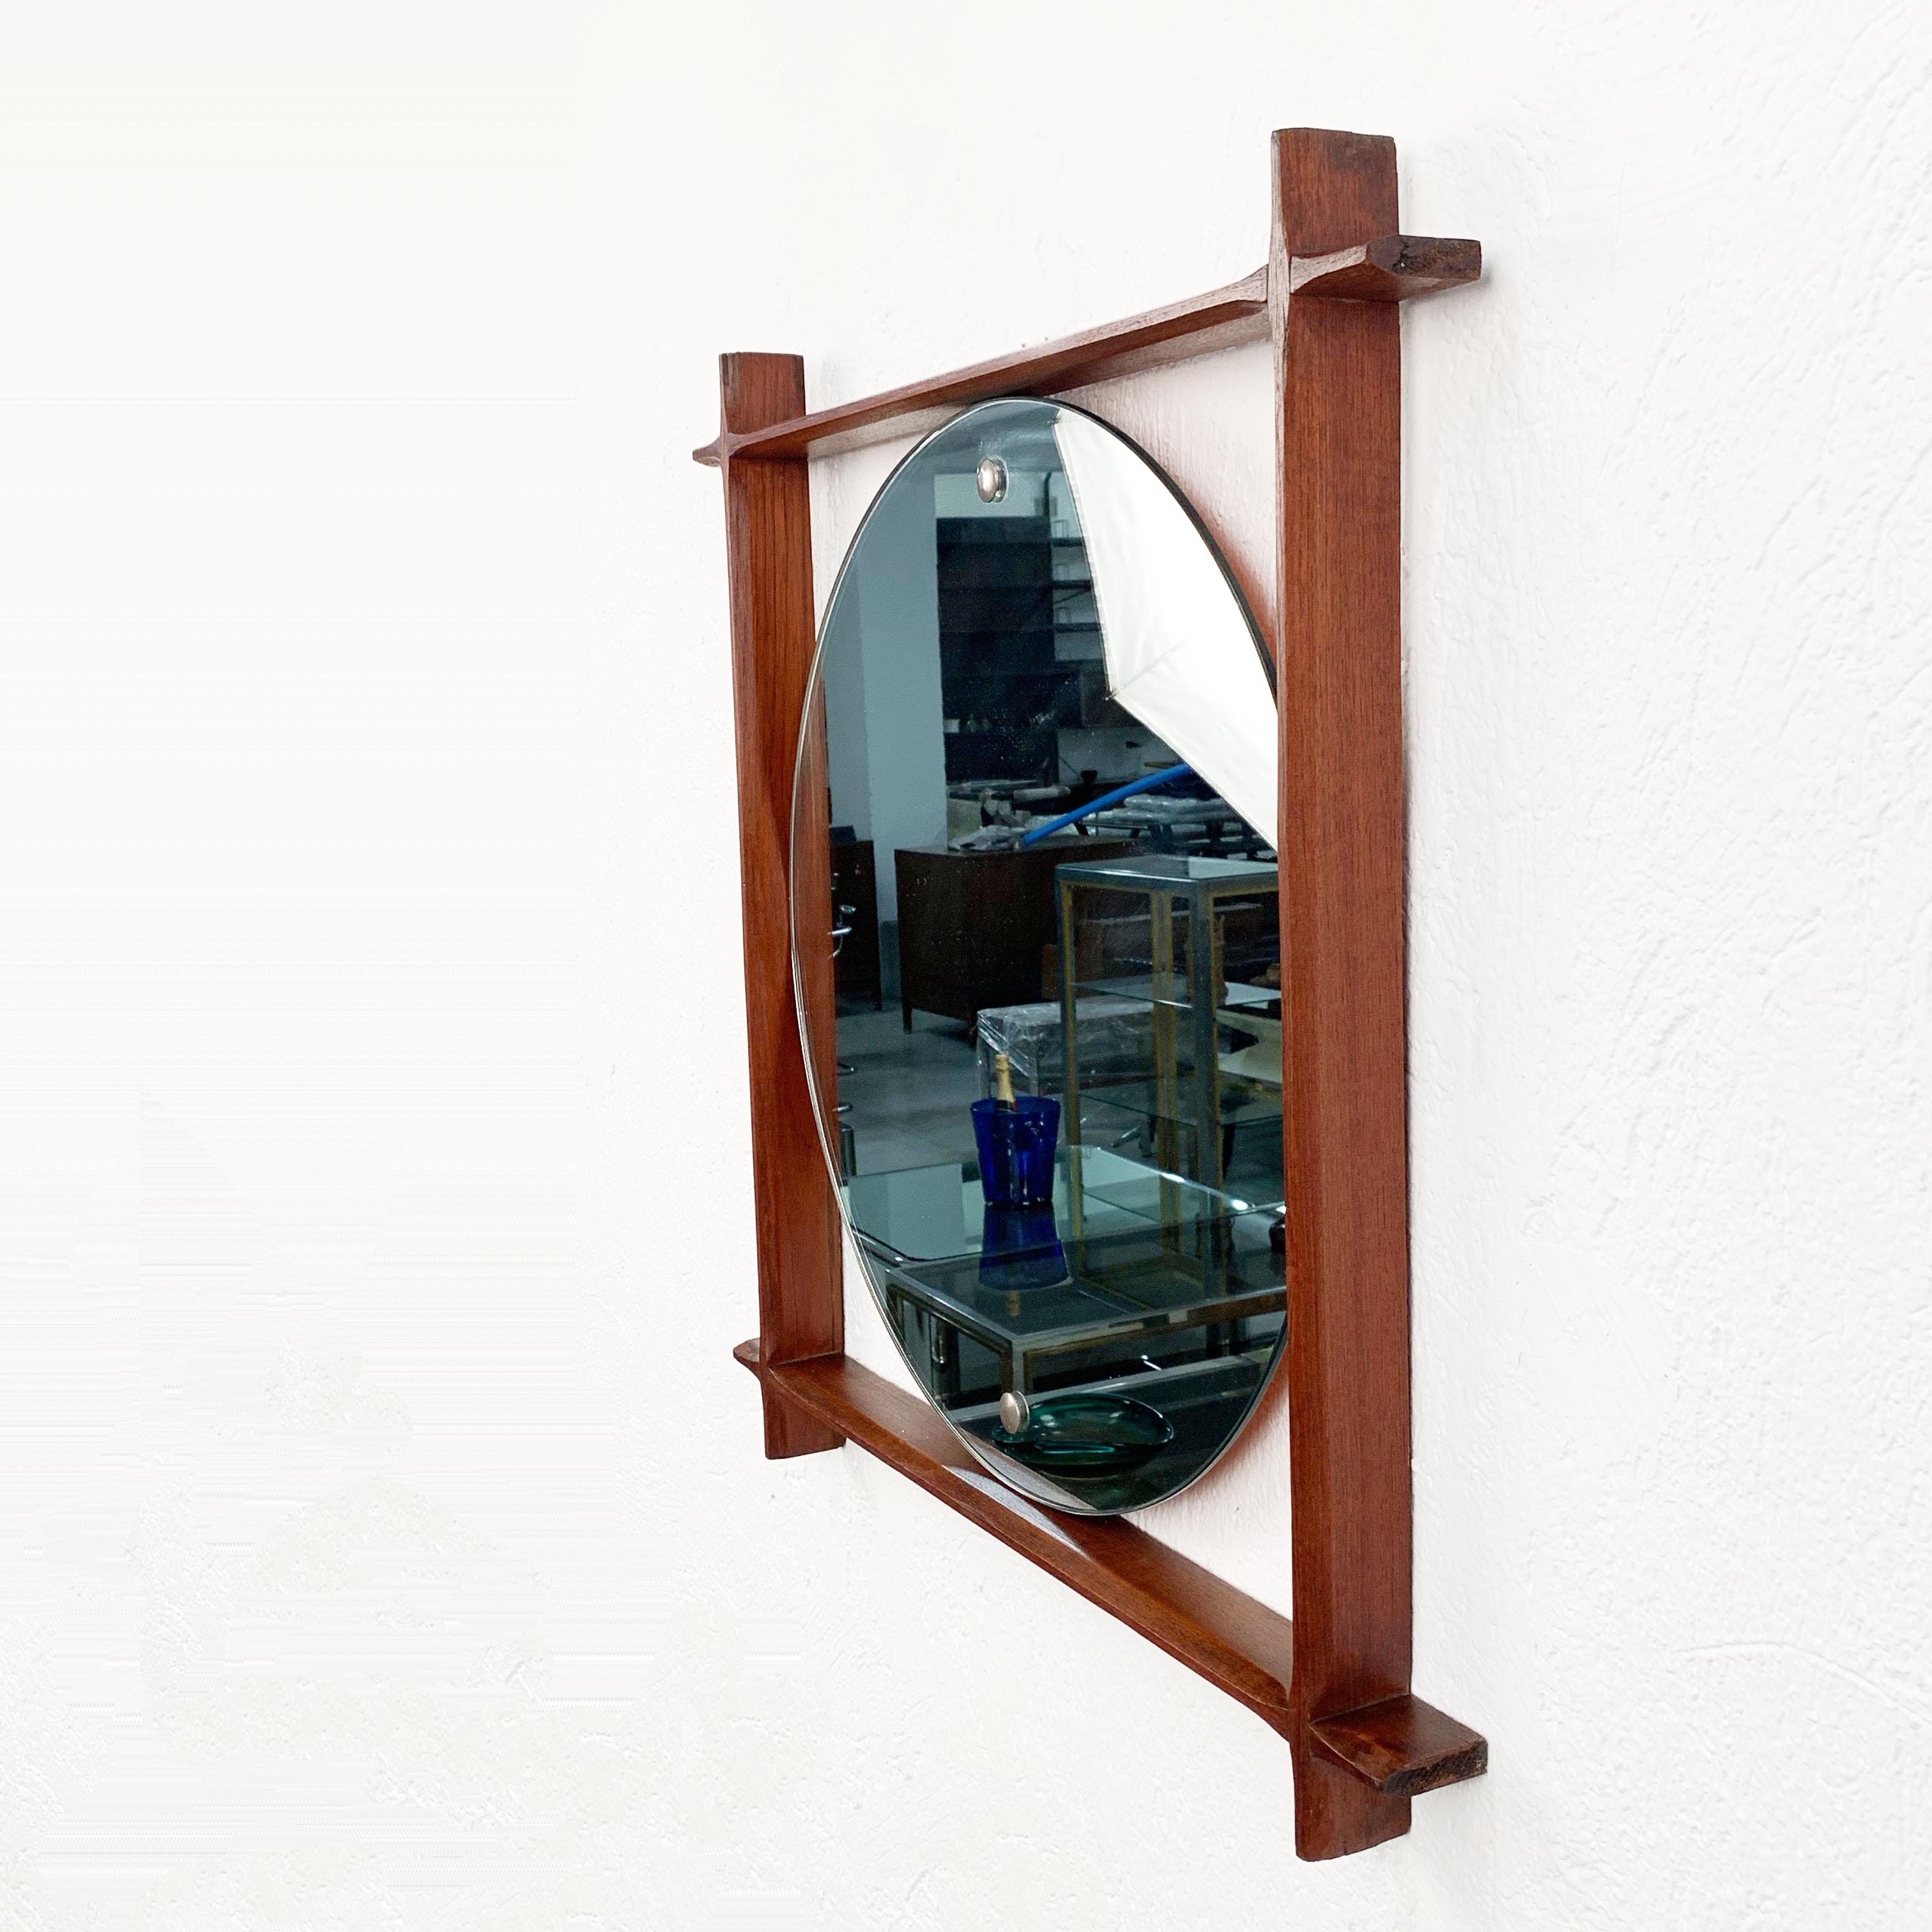 Round mirror with square frame. 1960s Italy, teak structure. Scandinavian style
Measures:
Frame 72 x 72 cm
Mirror diameter 59 cm

Vintage, signs of use of time.